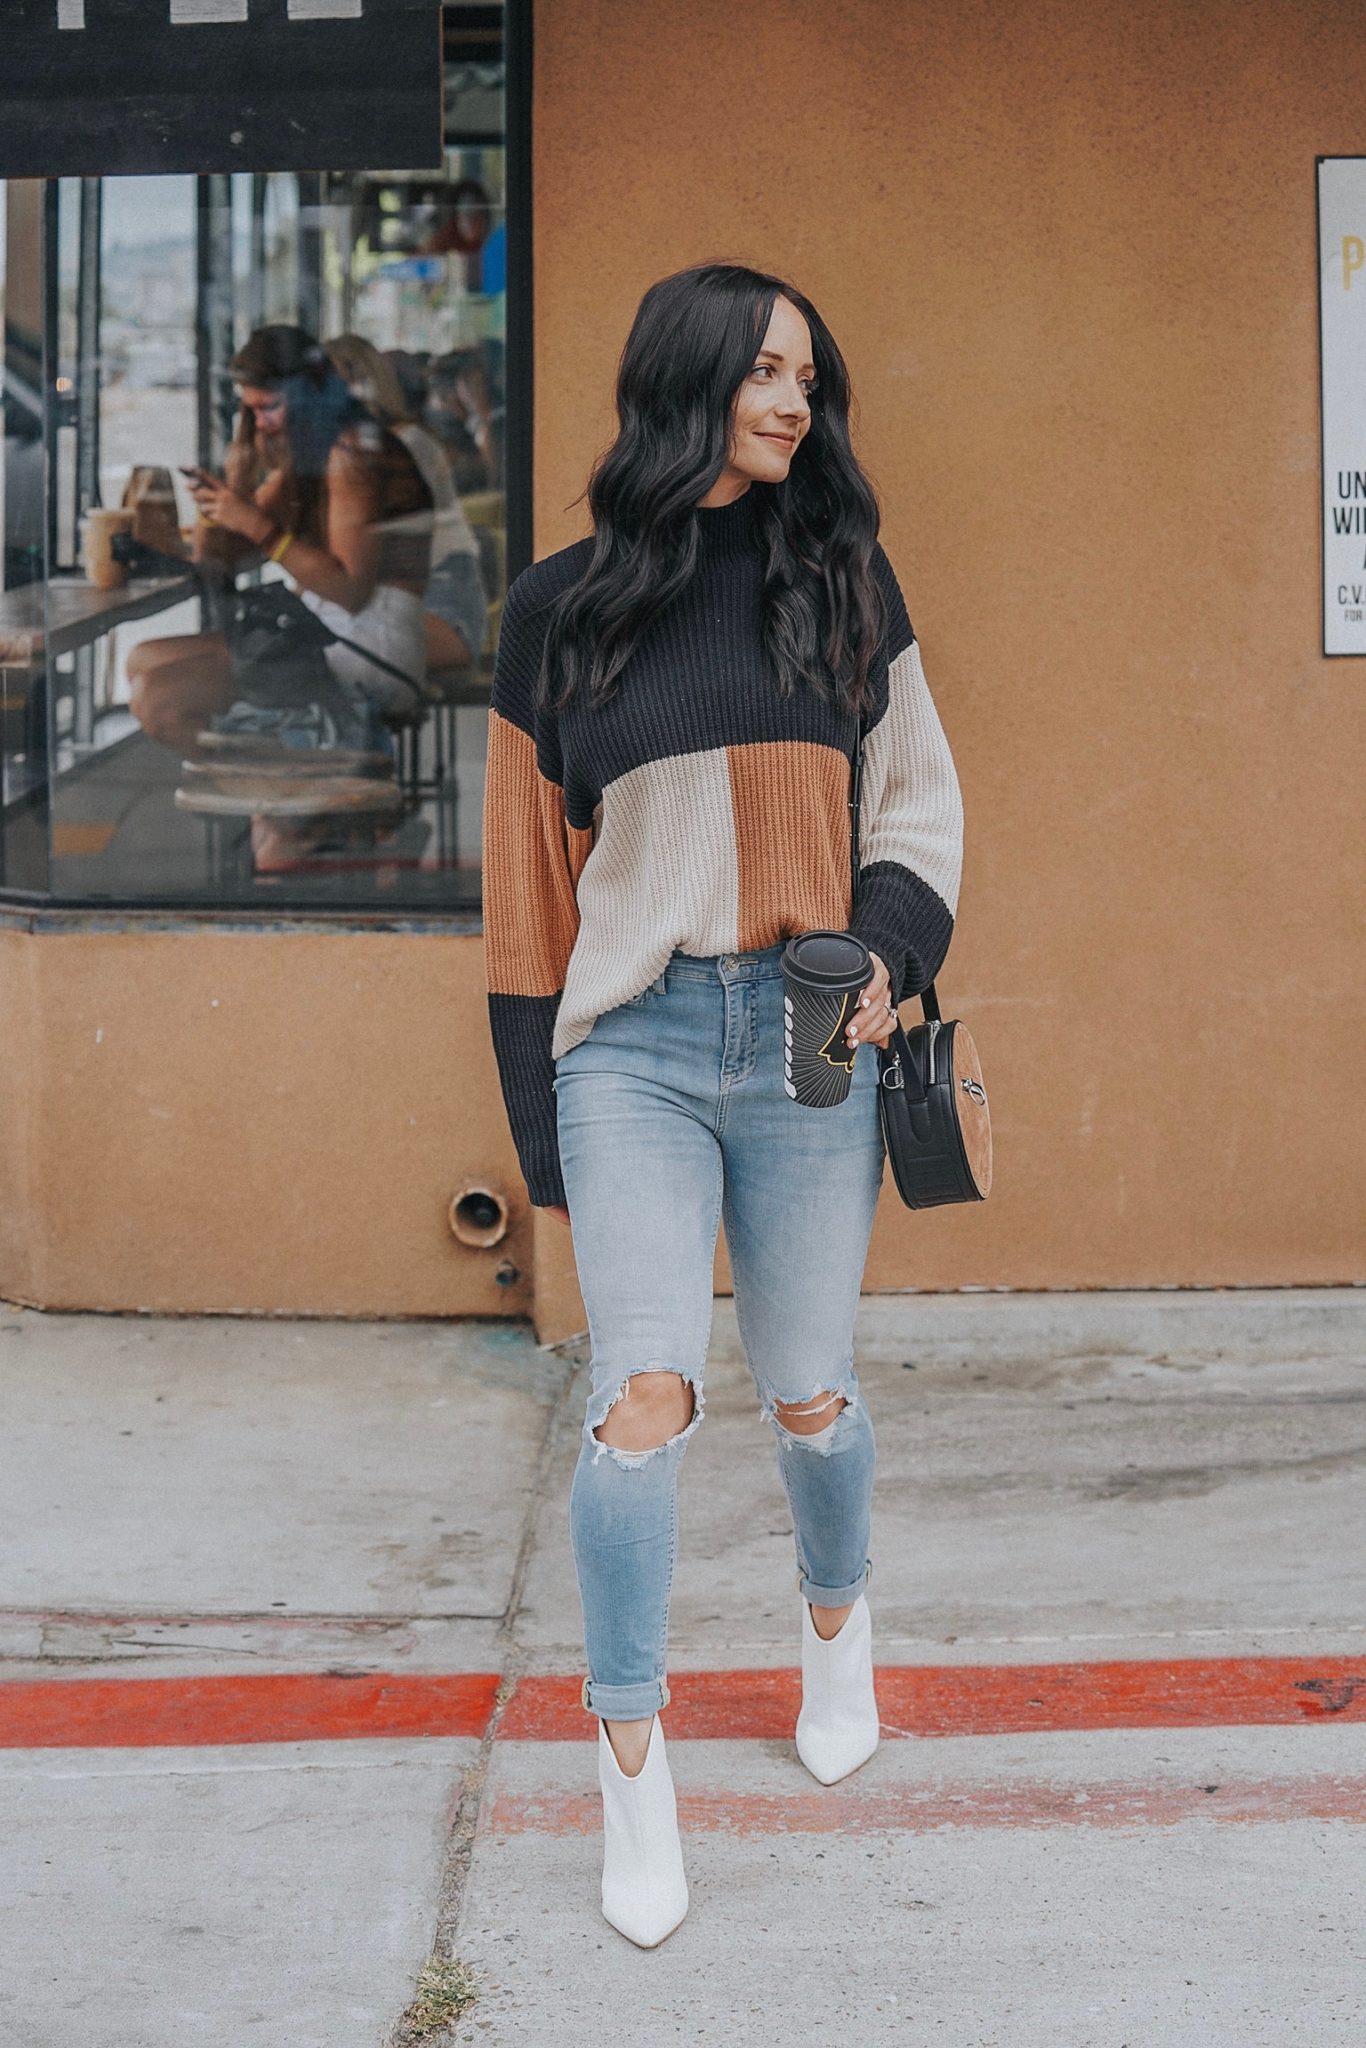 Cute Fall Sweaters You'll Want for the Season featured by popular Las Vegas fashion blogger, Outfits & Outings: Nordstrom Colorblock Sweater